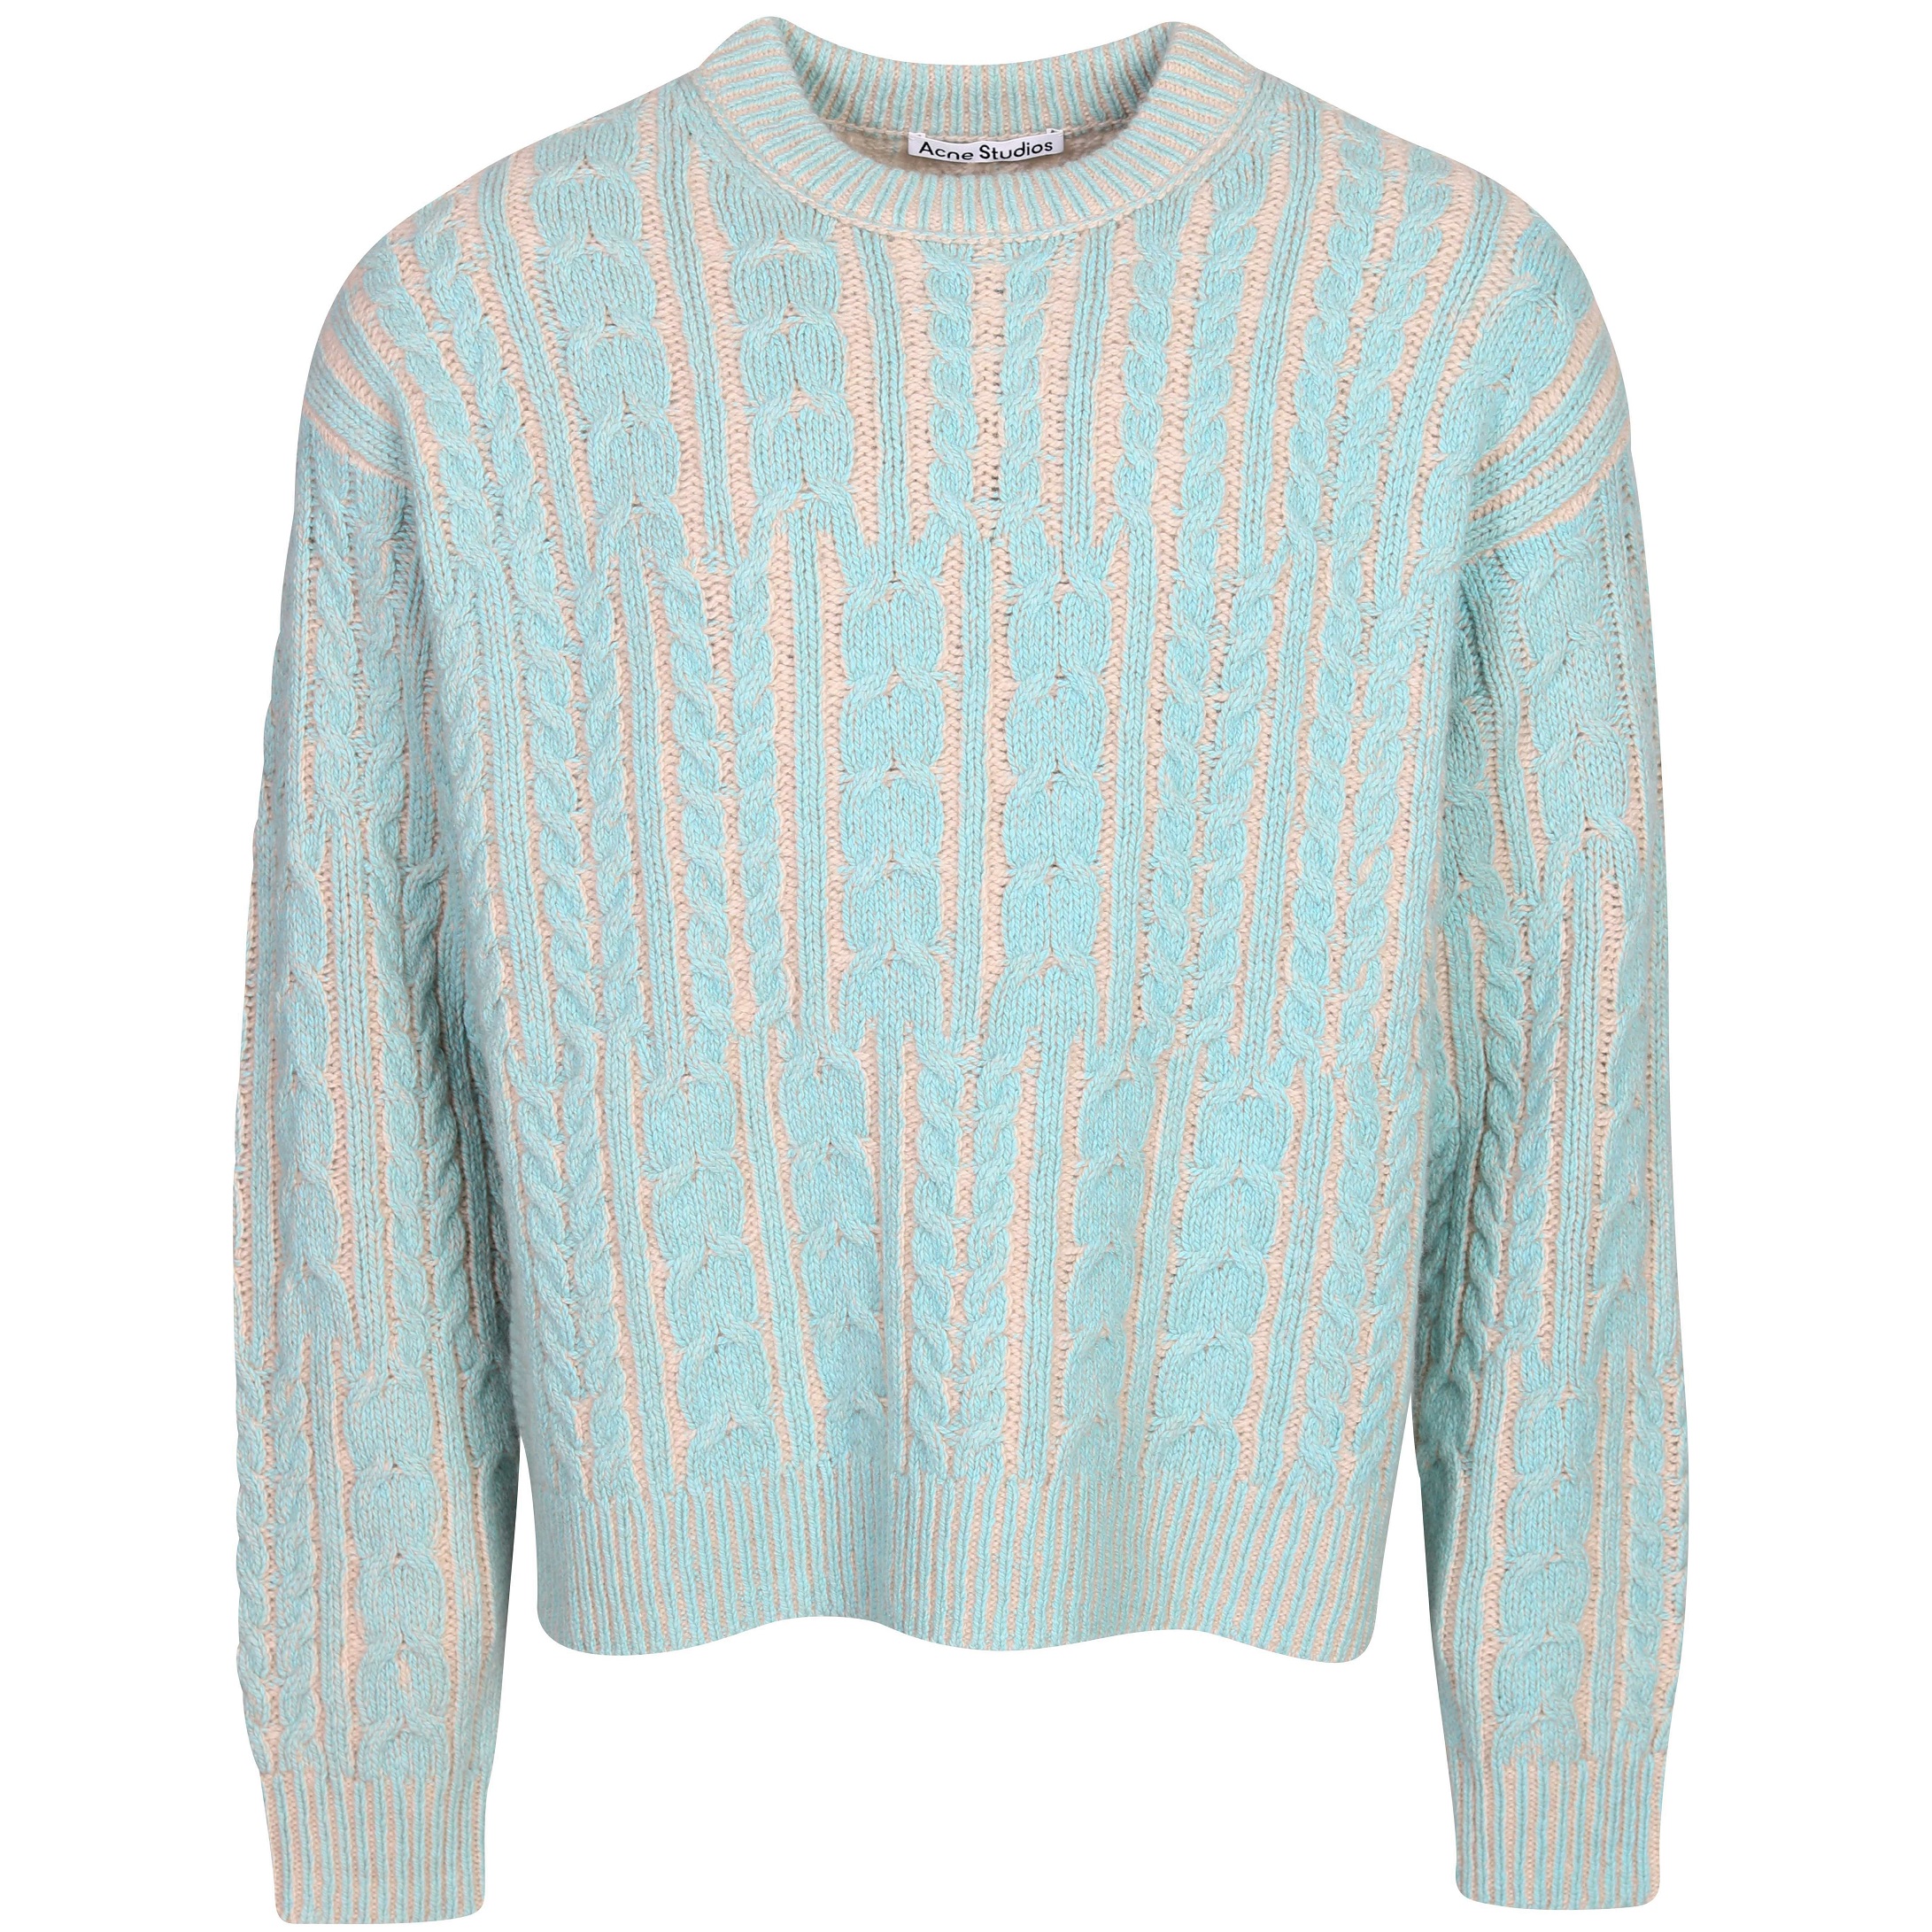 Acne Studios Knit Pullover in Turquoise Blue